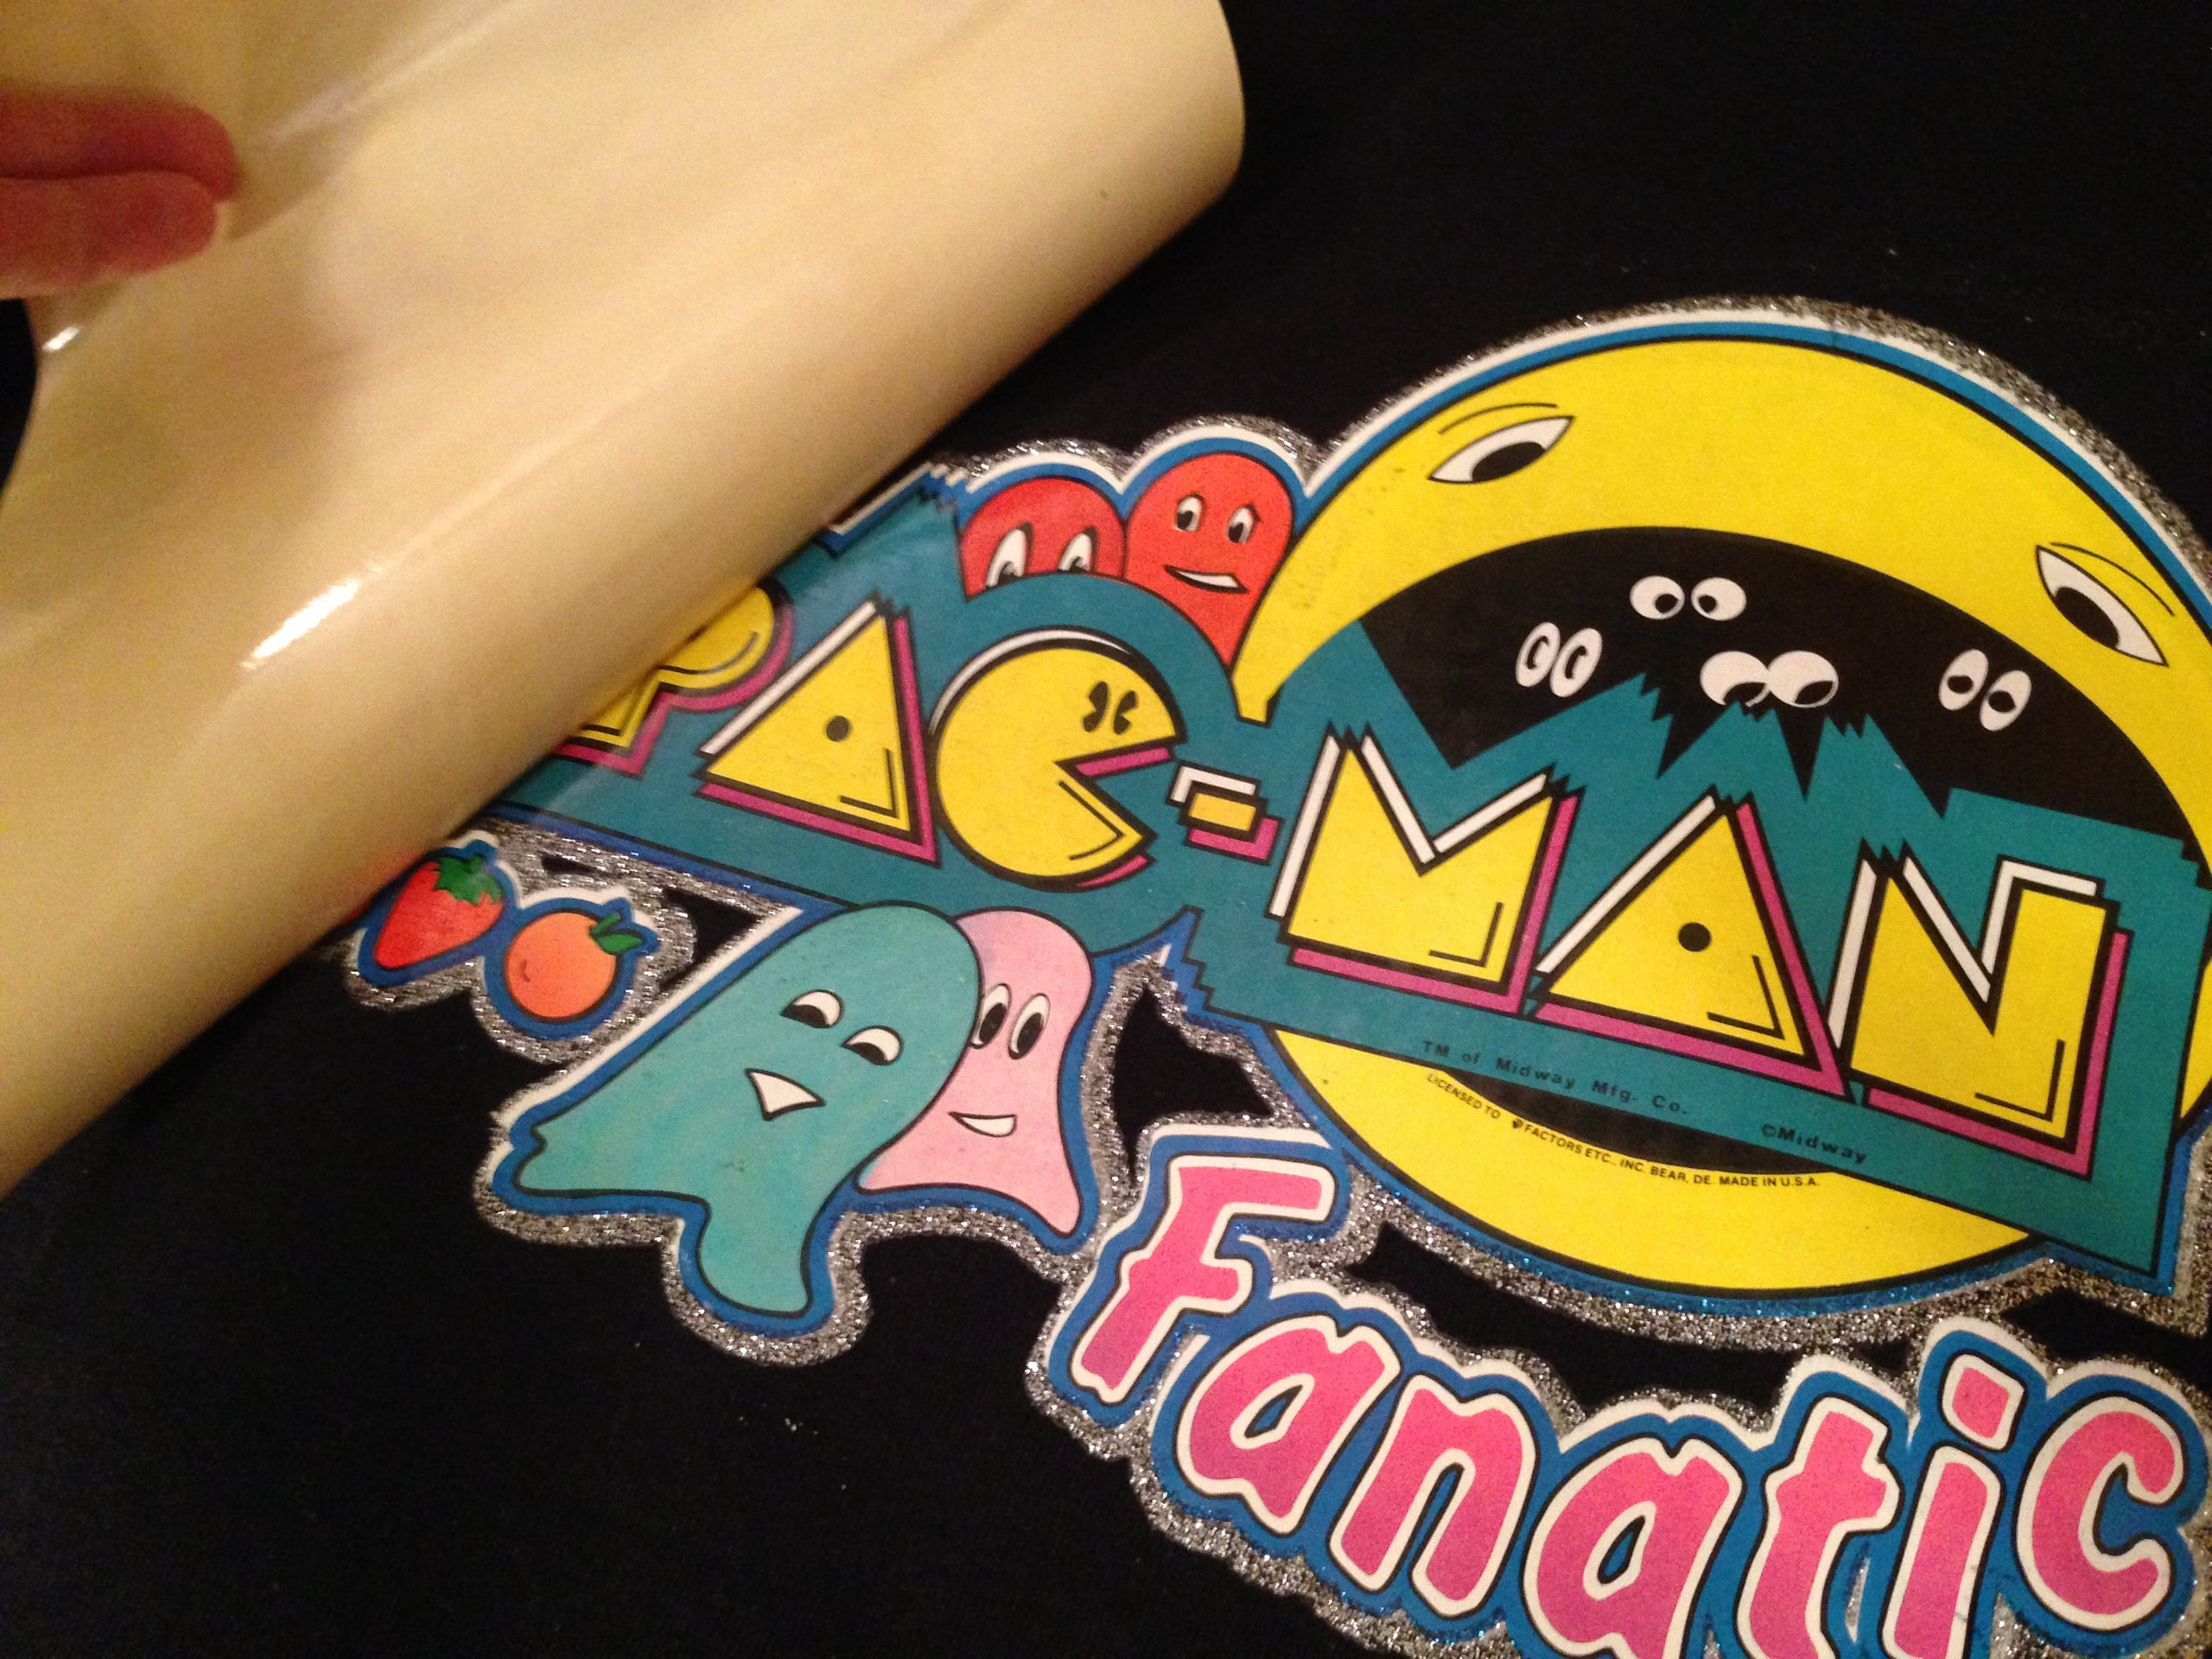 Details about   Vintage Pac-Man Fanatic Iron On Transfer NOS